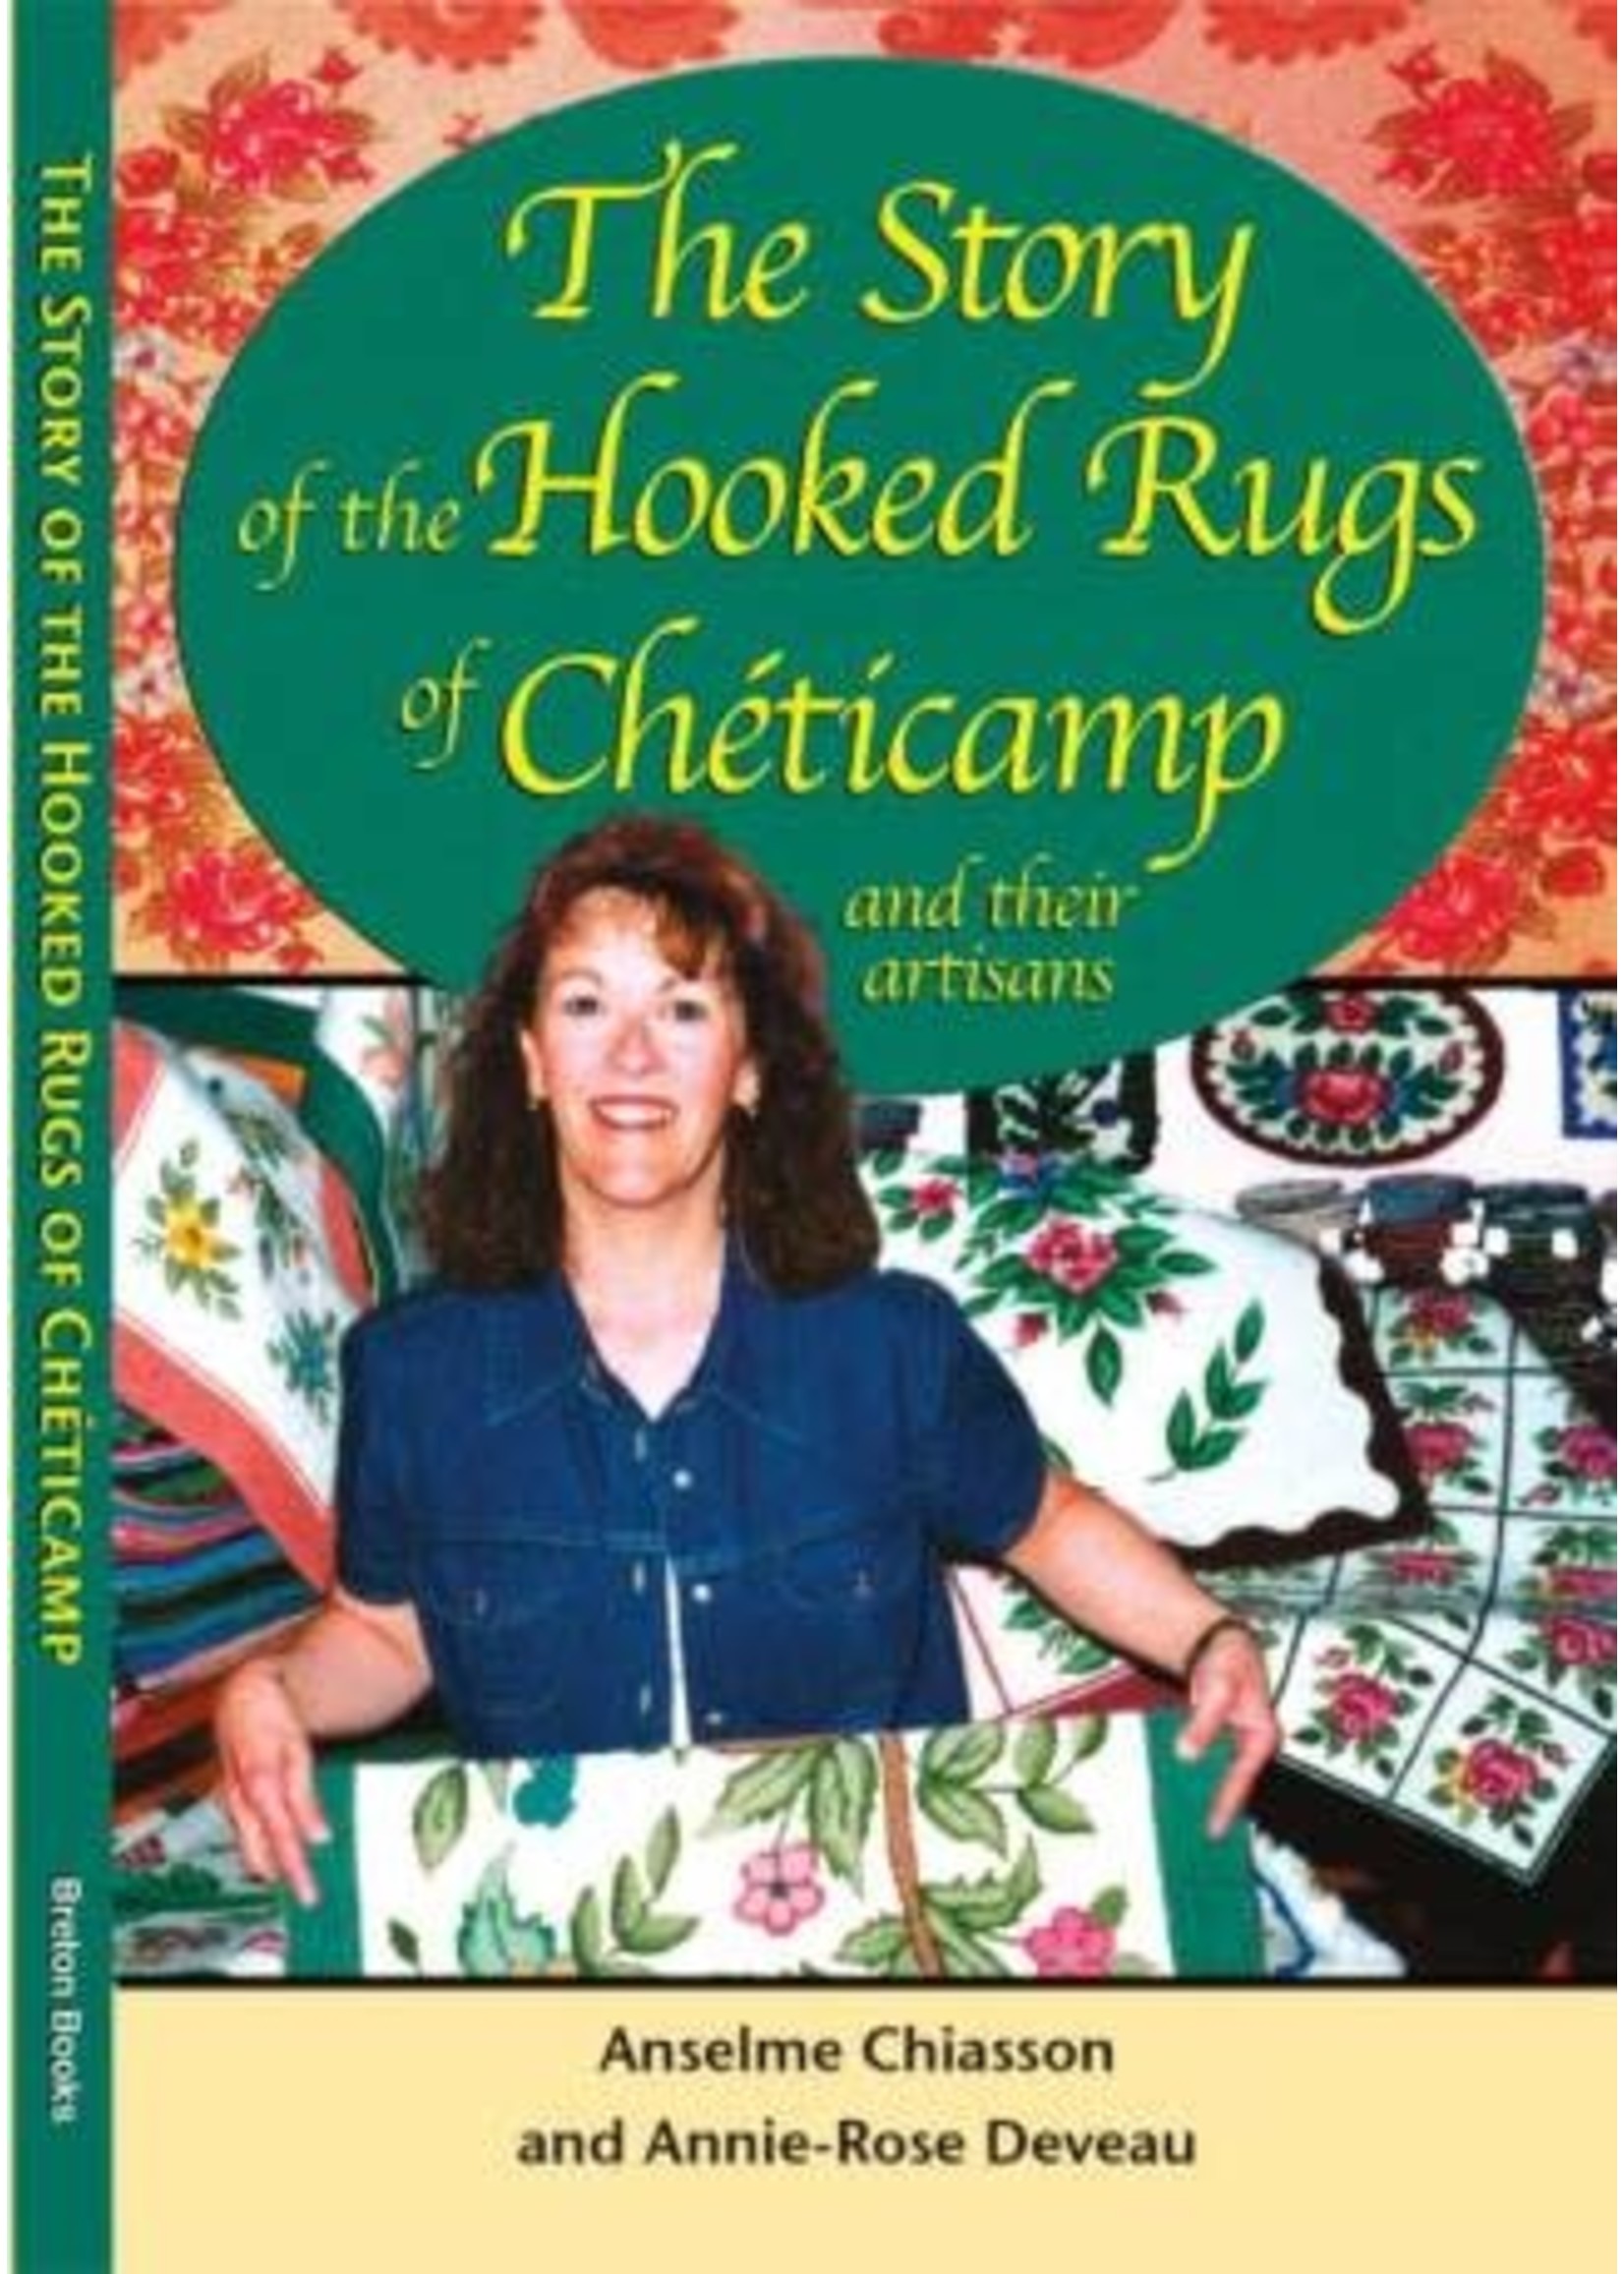 The Story of the Hooked Rugs of Cheticamp and Their Artisans by Anselme Chiasson, Annie-Rose Deveau